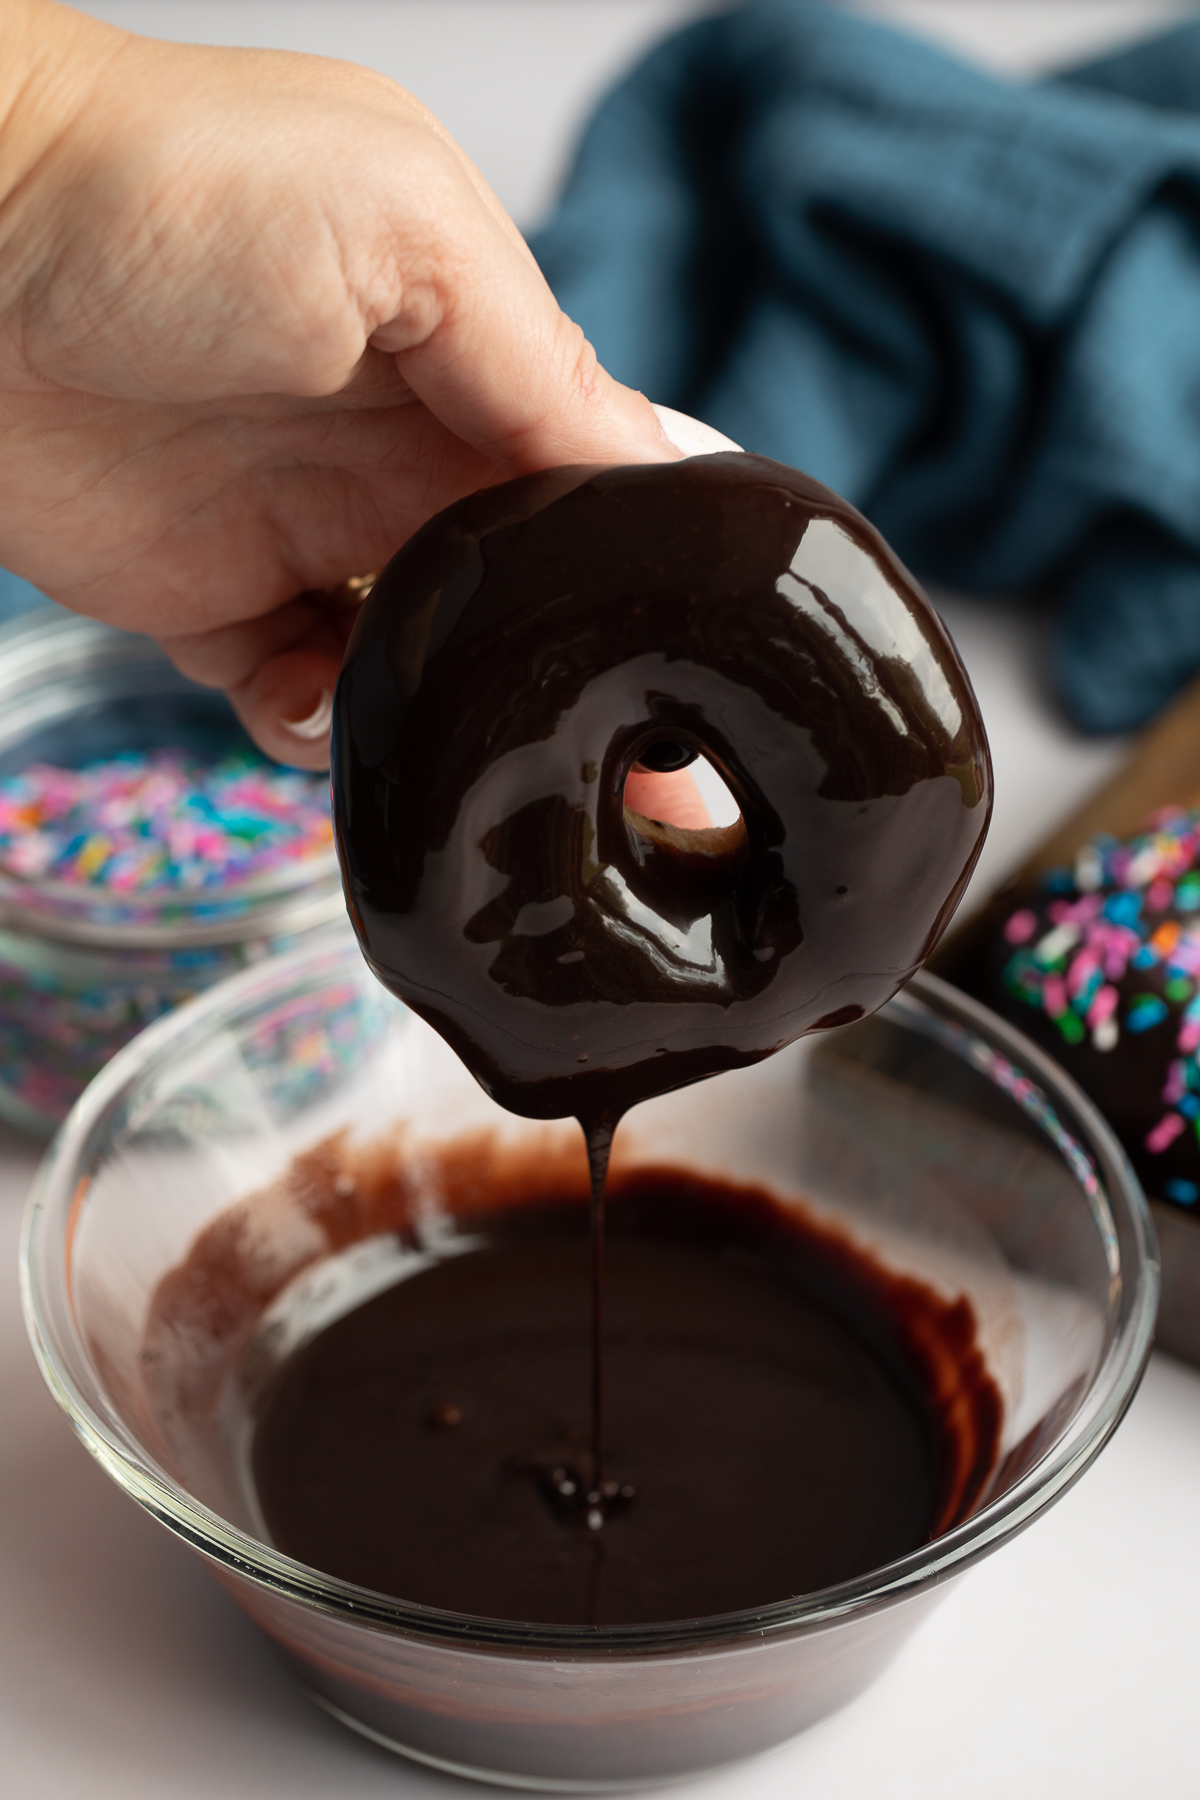 hand dipping donut into chocolate glaze